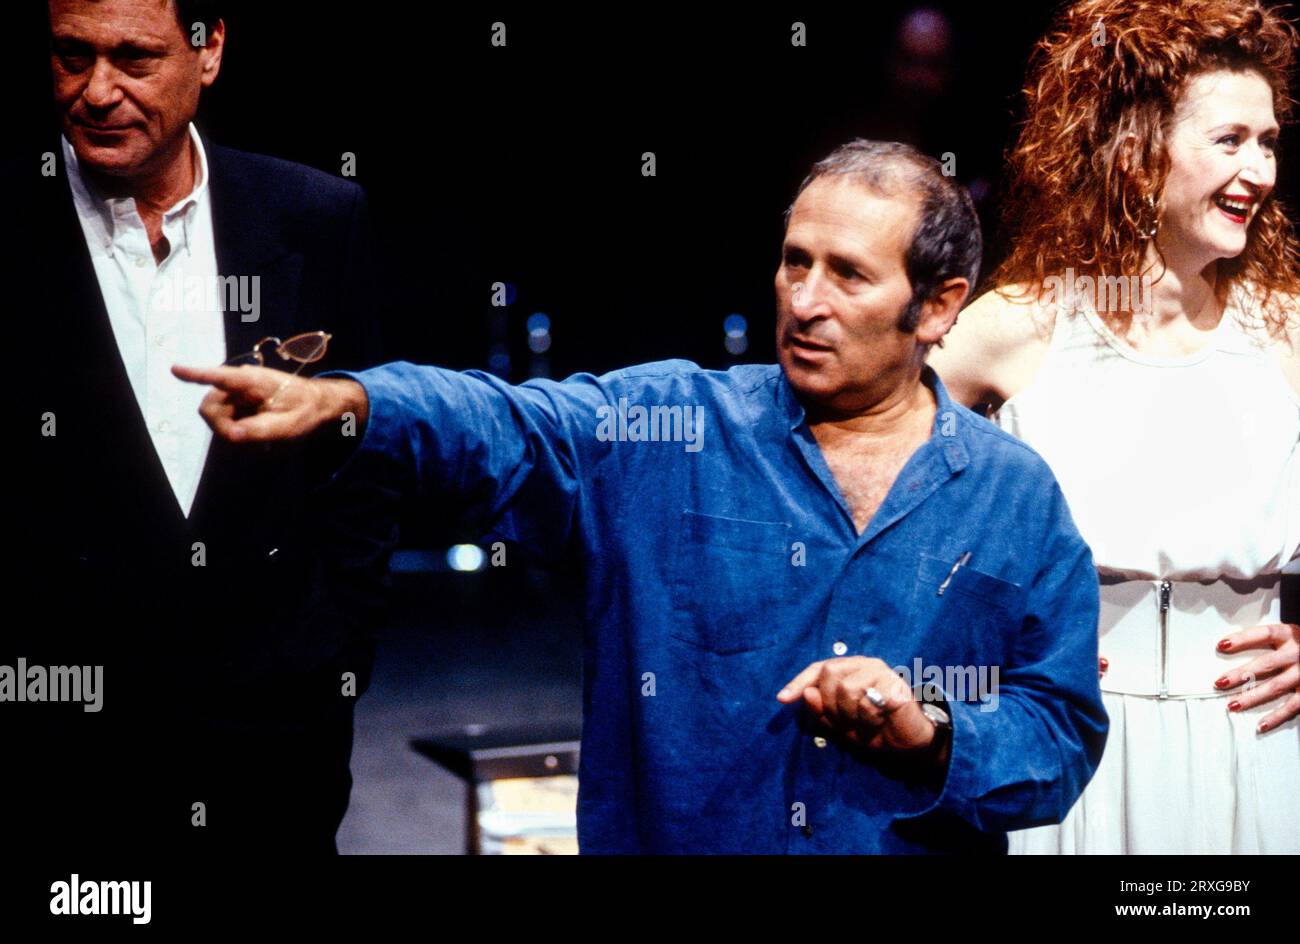 playwright and stage director Arnold Wesker (1932-2016) at a press photo call for a rehearsed reading of his play SHYLOCK at the Riverside Studios, London W6  16/10/1989  with Oded Teomi (Shylock Kolner) & Julie Legrand (Portia Contarini) Stock Photo